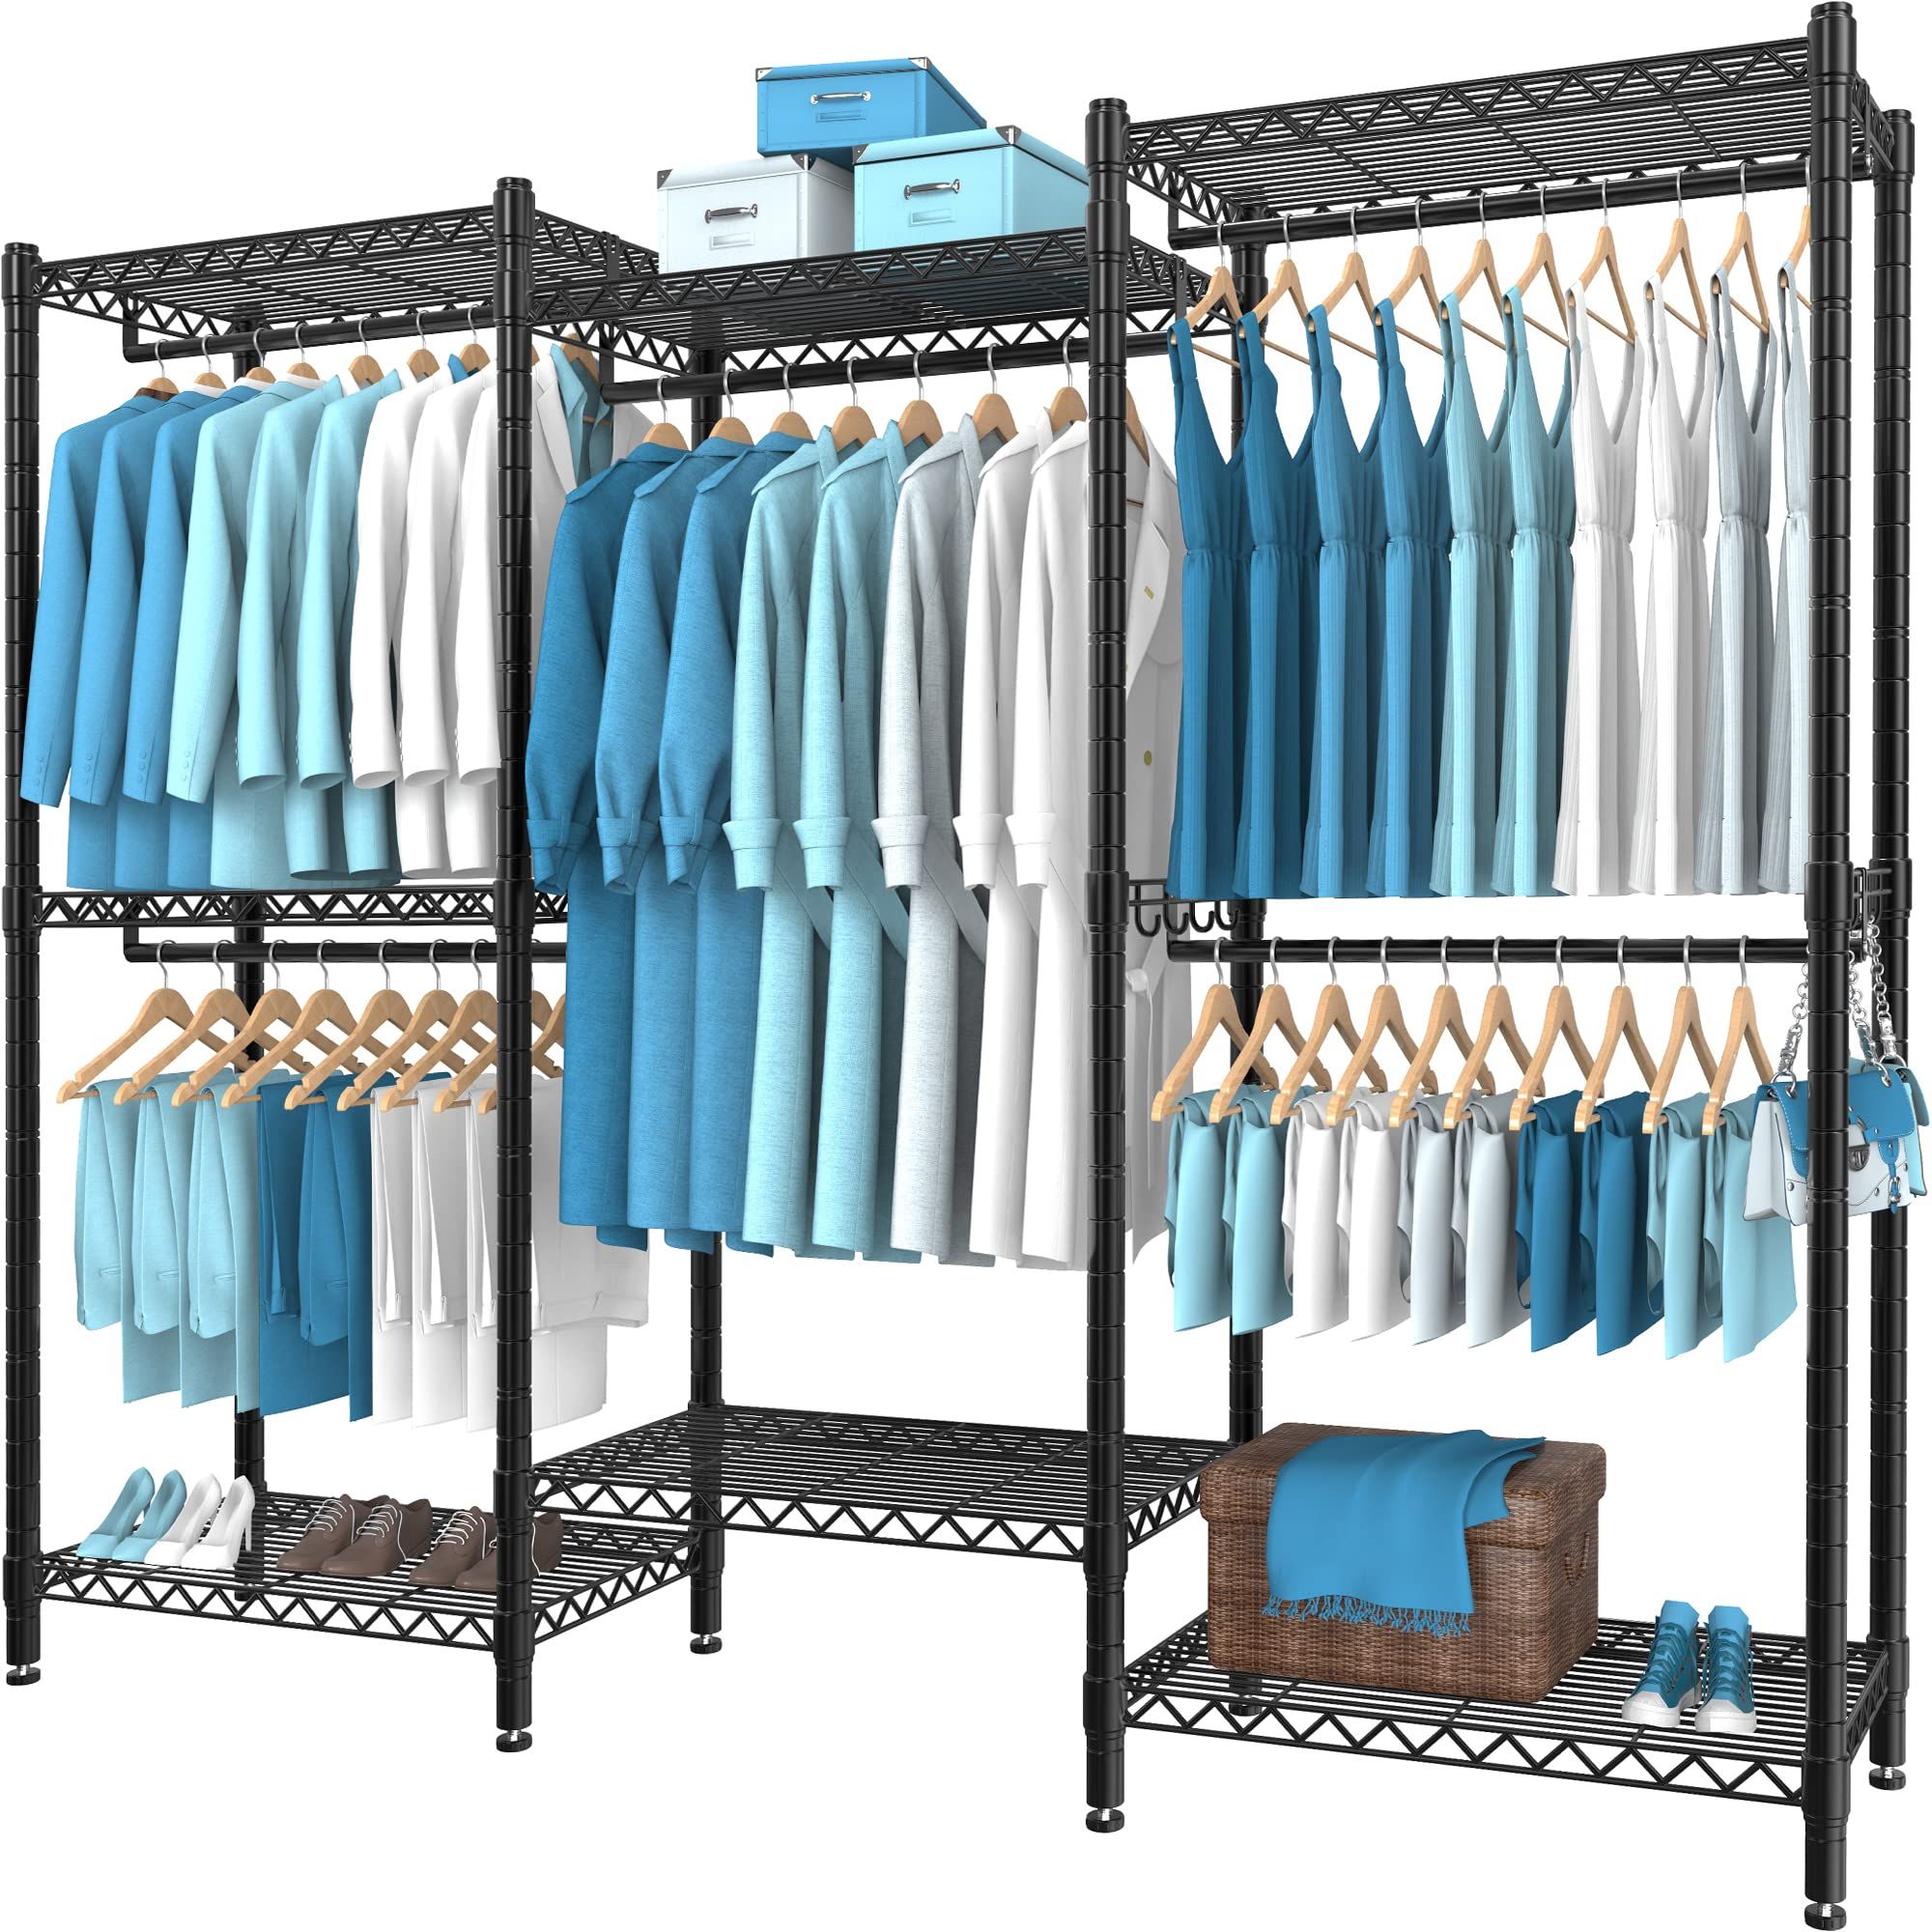 Wire Garment Rack Wardrobes Pertaining To Well Known Amazon: Punion Portable Wardrobe Rack, 7 Tiers Wire Shelving Black Garment  Rack, Compact Extra Large Clothing Racks Metal With 5 Hanging Rods, 1 Pair  Side Hooks For Hanging Clothes : Clothing, Shoes & Jewelry (View 7 of 10)